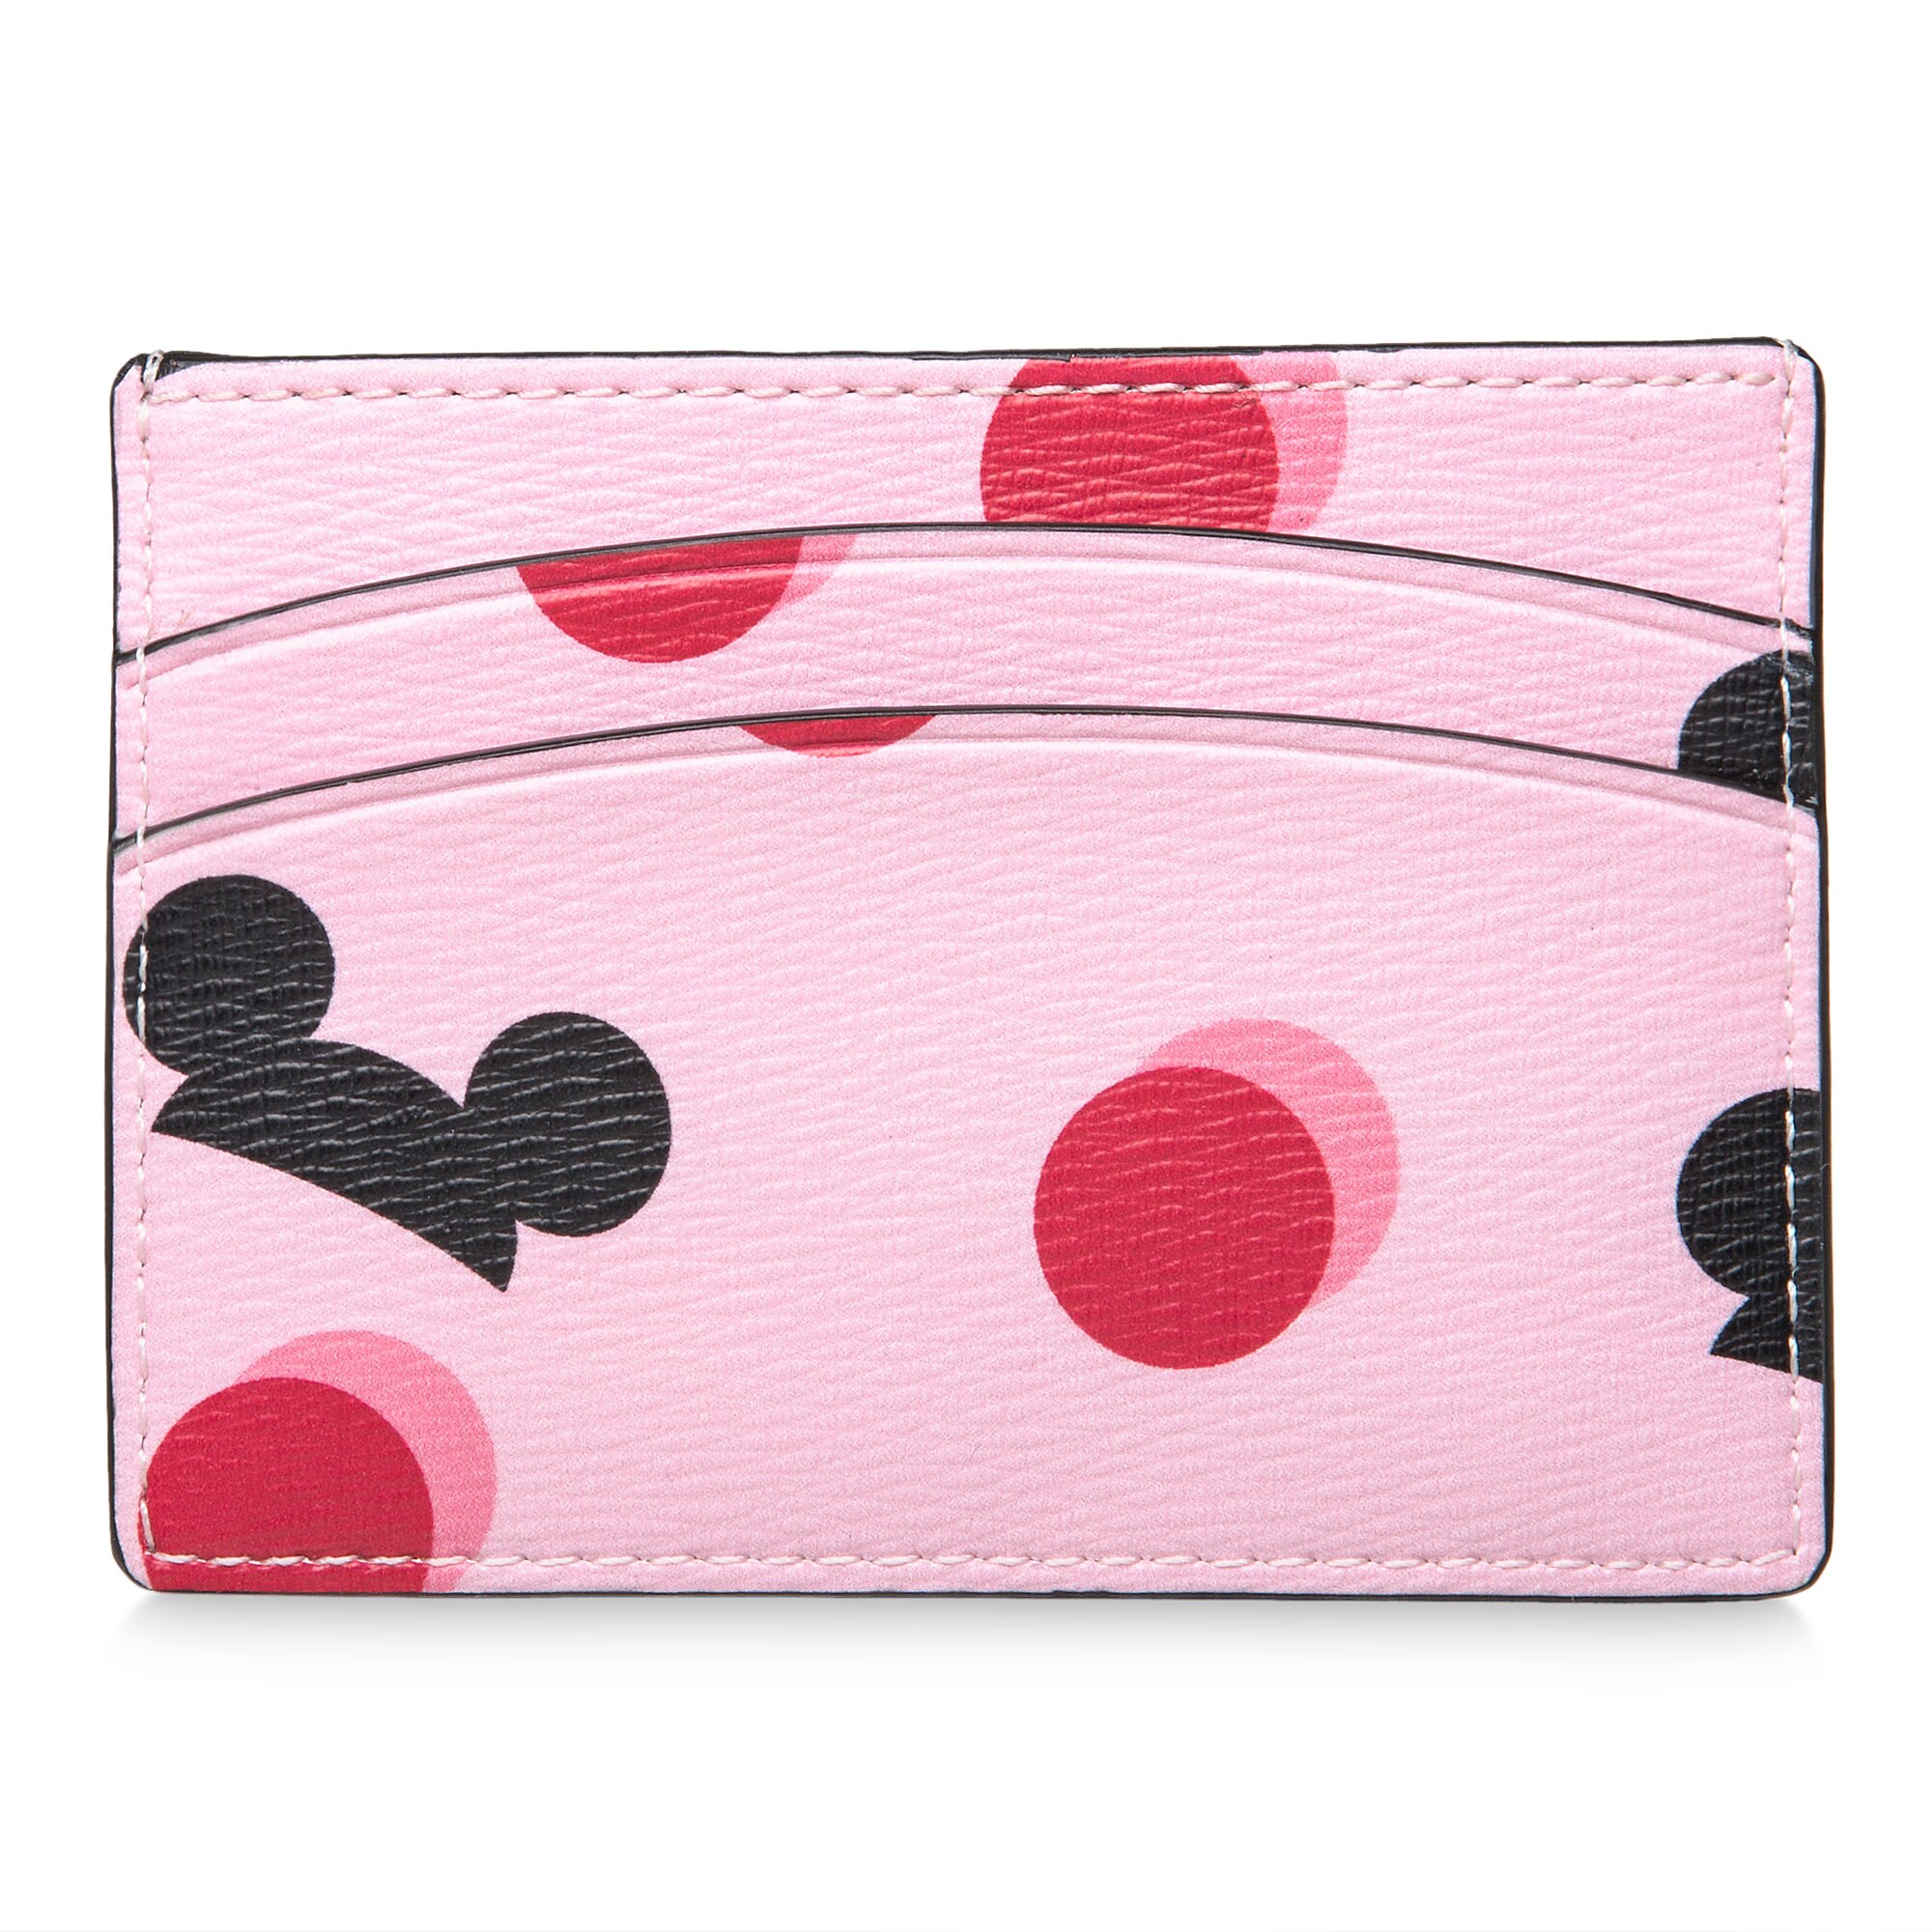 Mickey Mouse Ear Hat Credit Card Case by kate spade new york - Pink